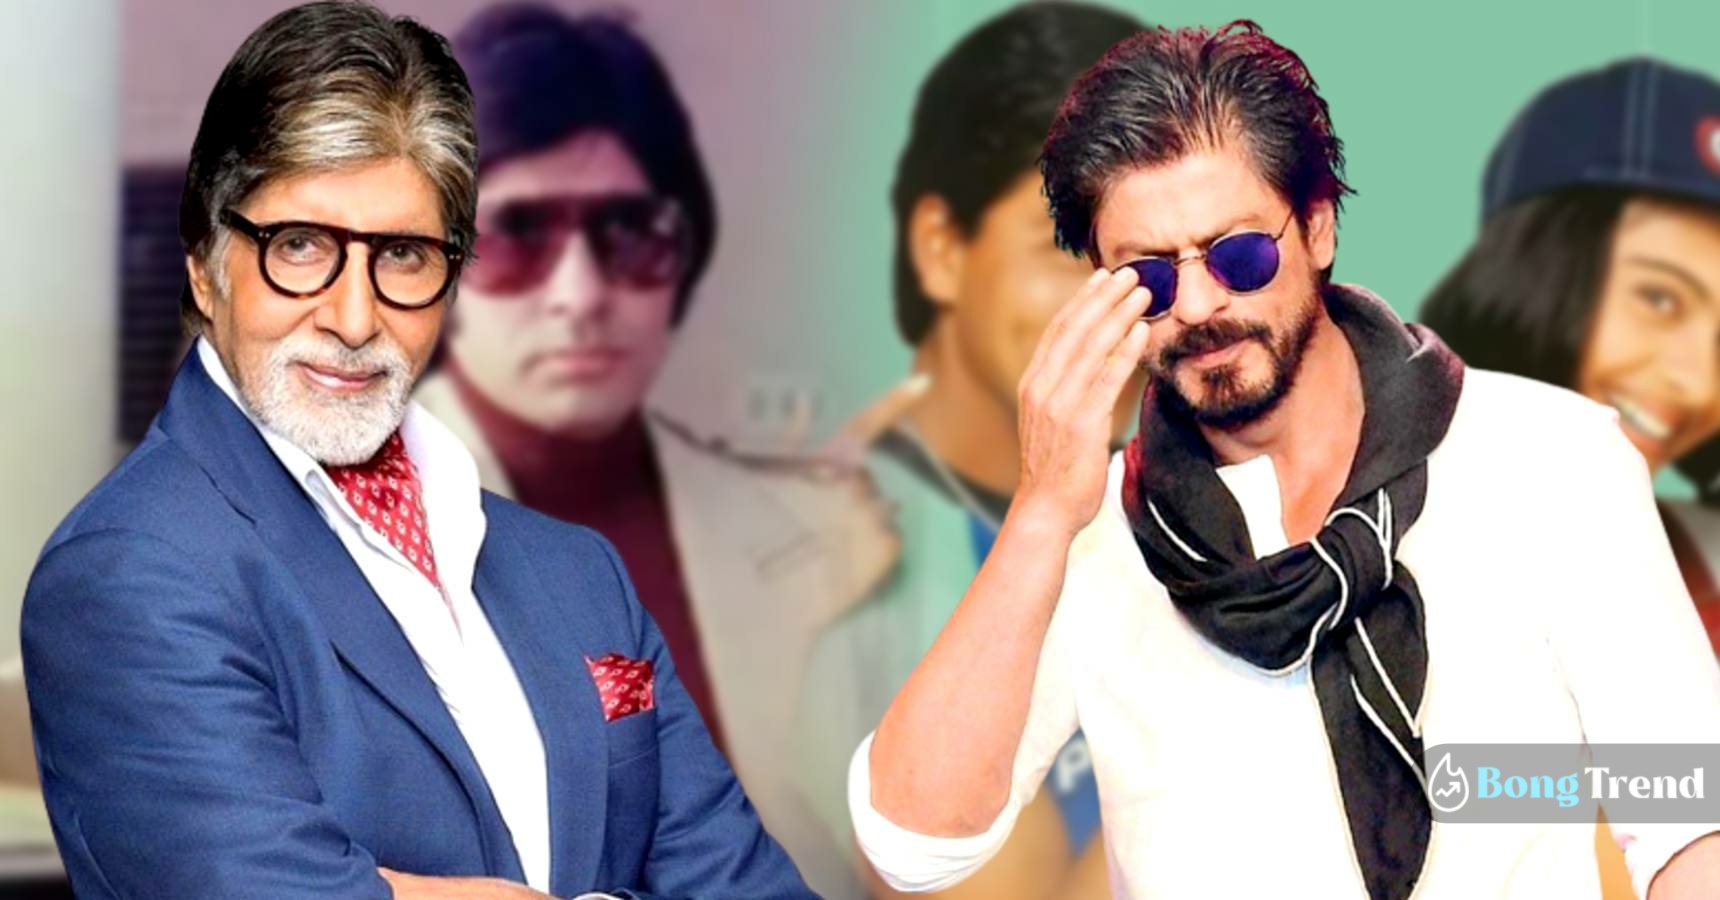 Bollywood actors who has given the most blockbuster movies